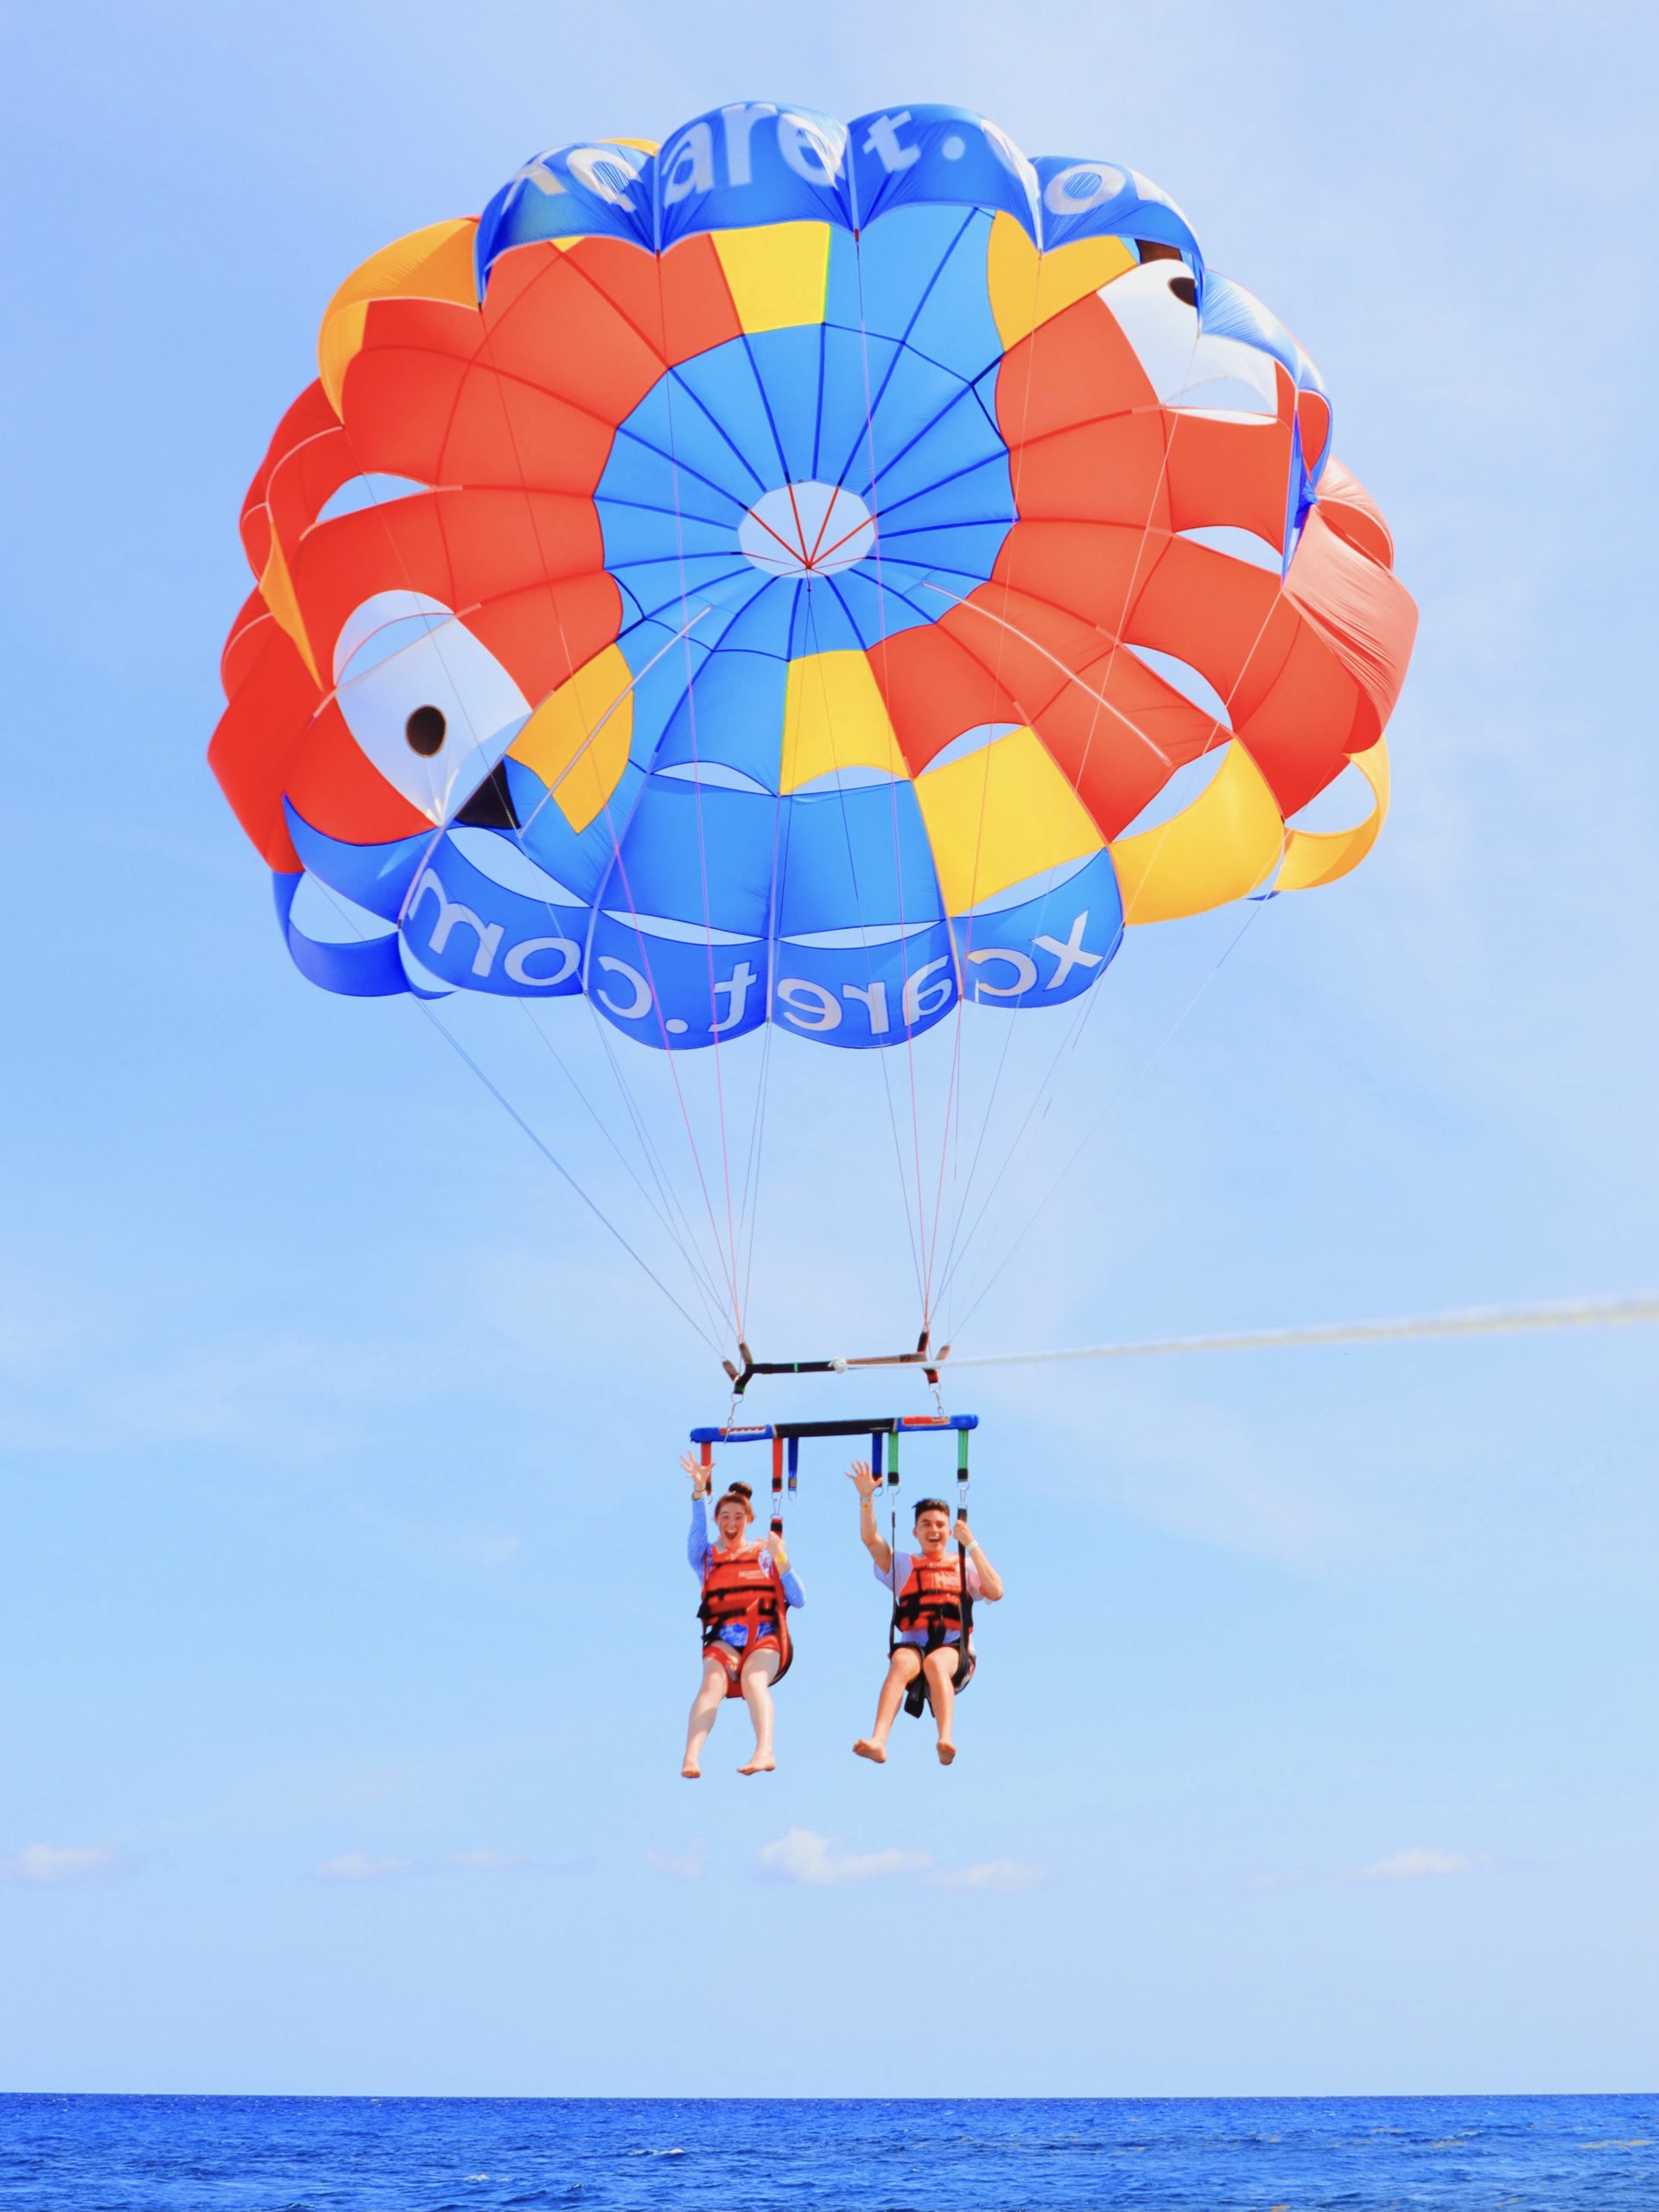 Two students doing "sic 'ems" while parasailing